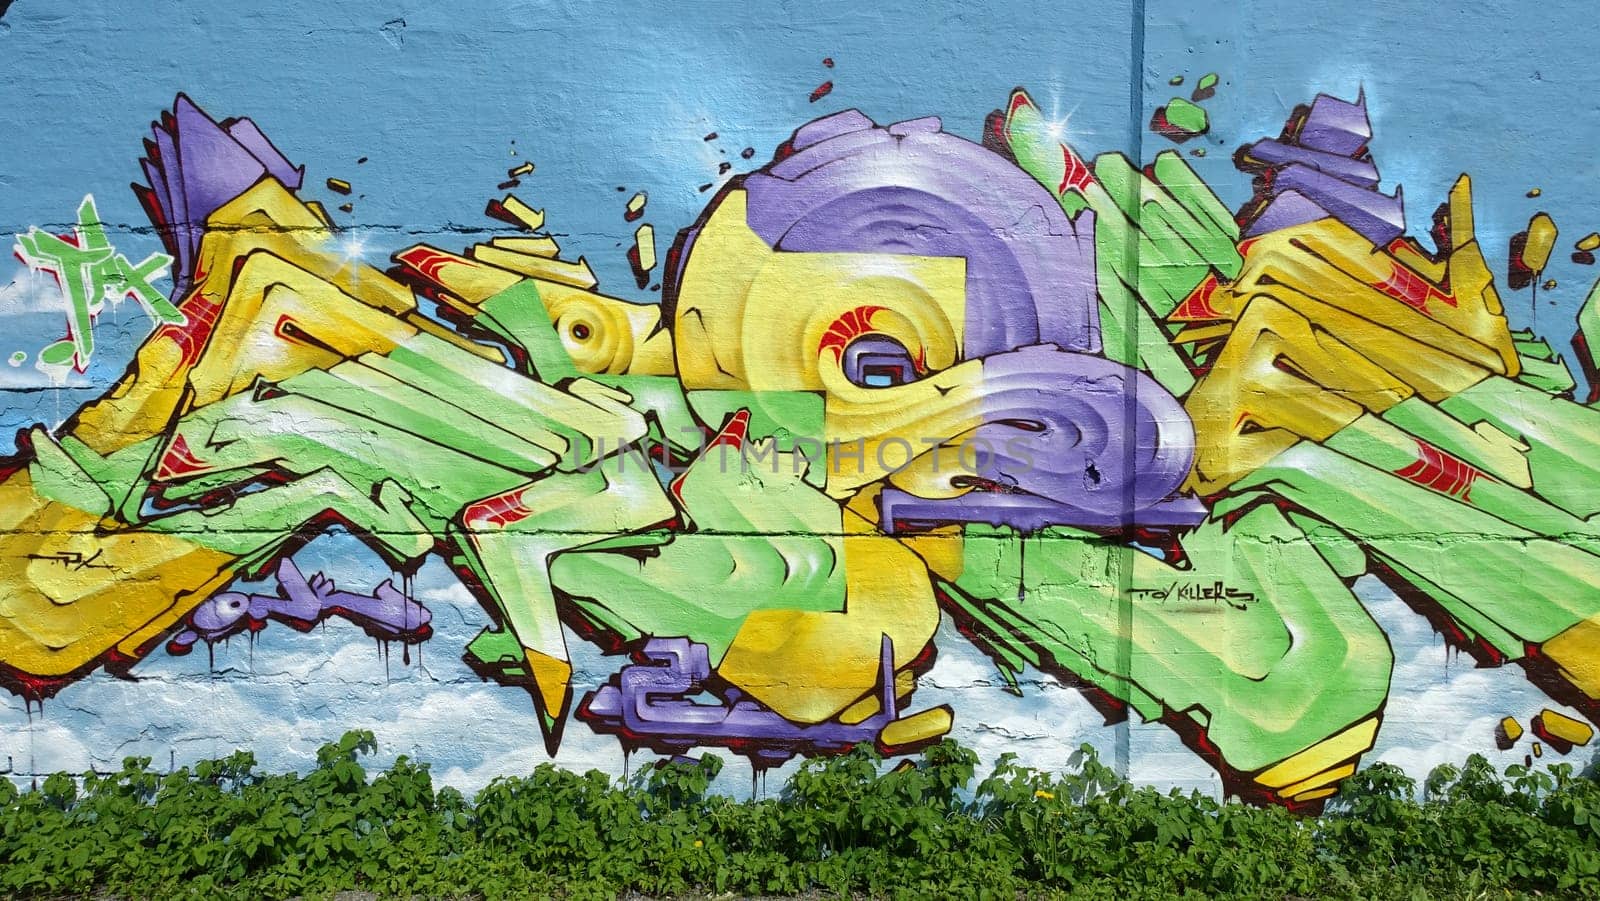 Stockholm, Snosatra, Sweden, May 23 2021. Graffiti exhibition on the outskirts of the city. Yellow.